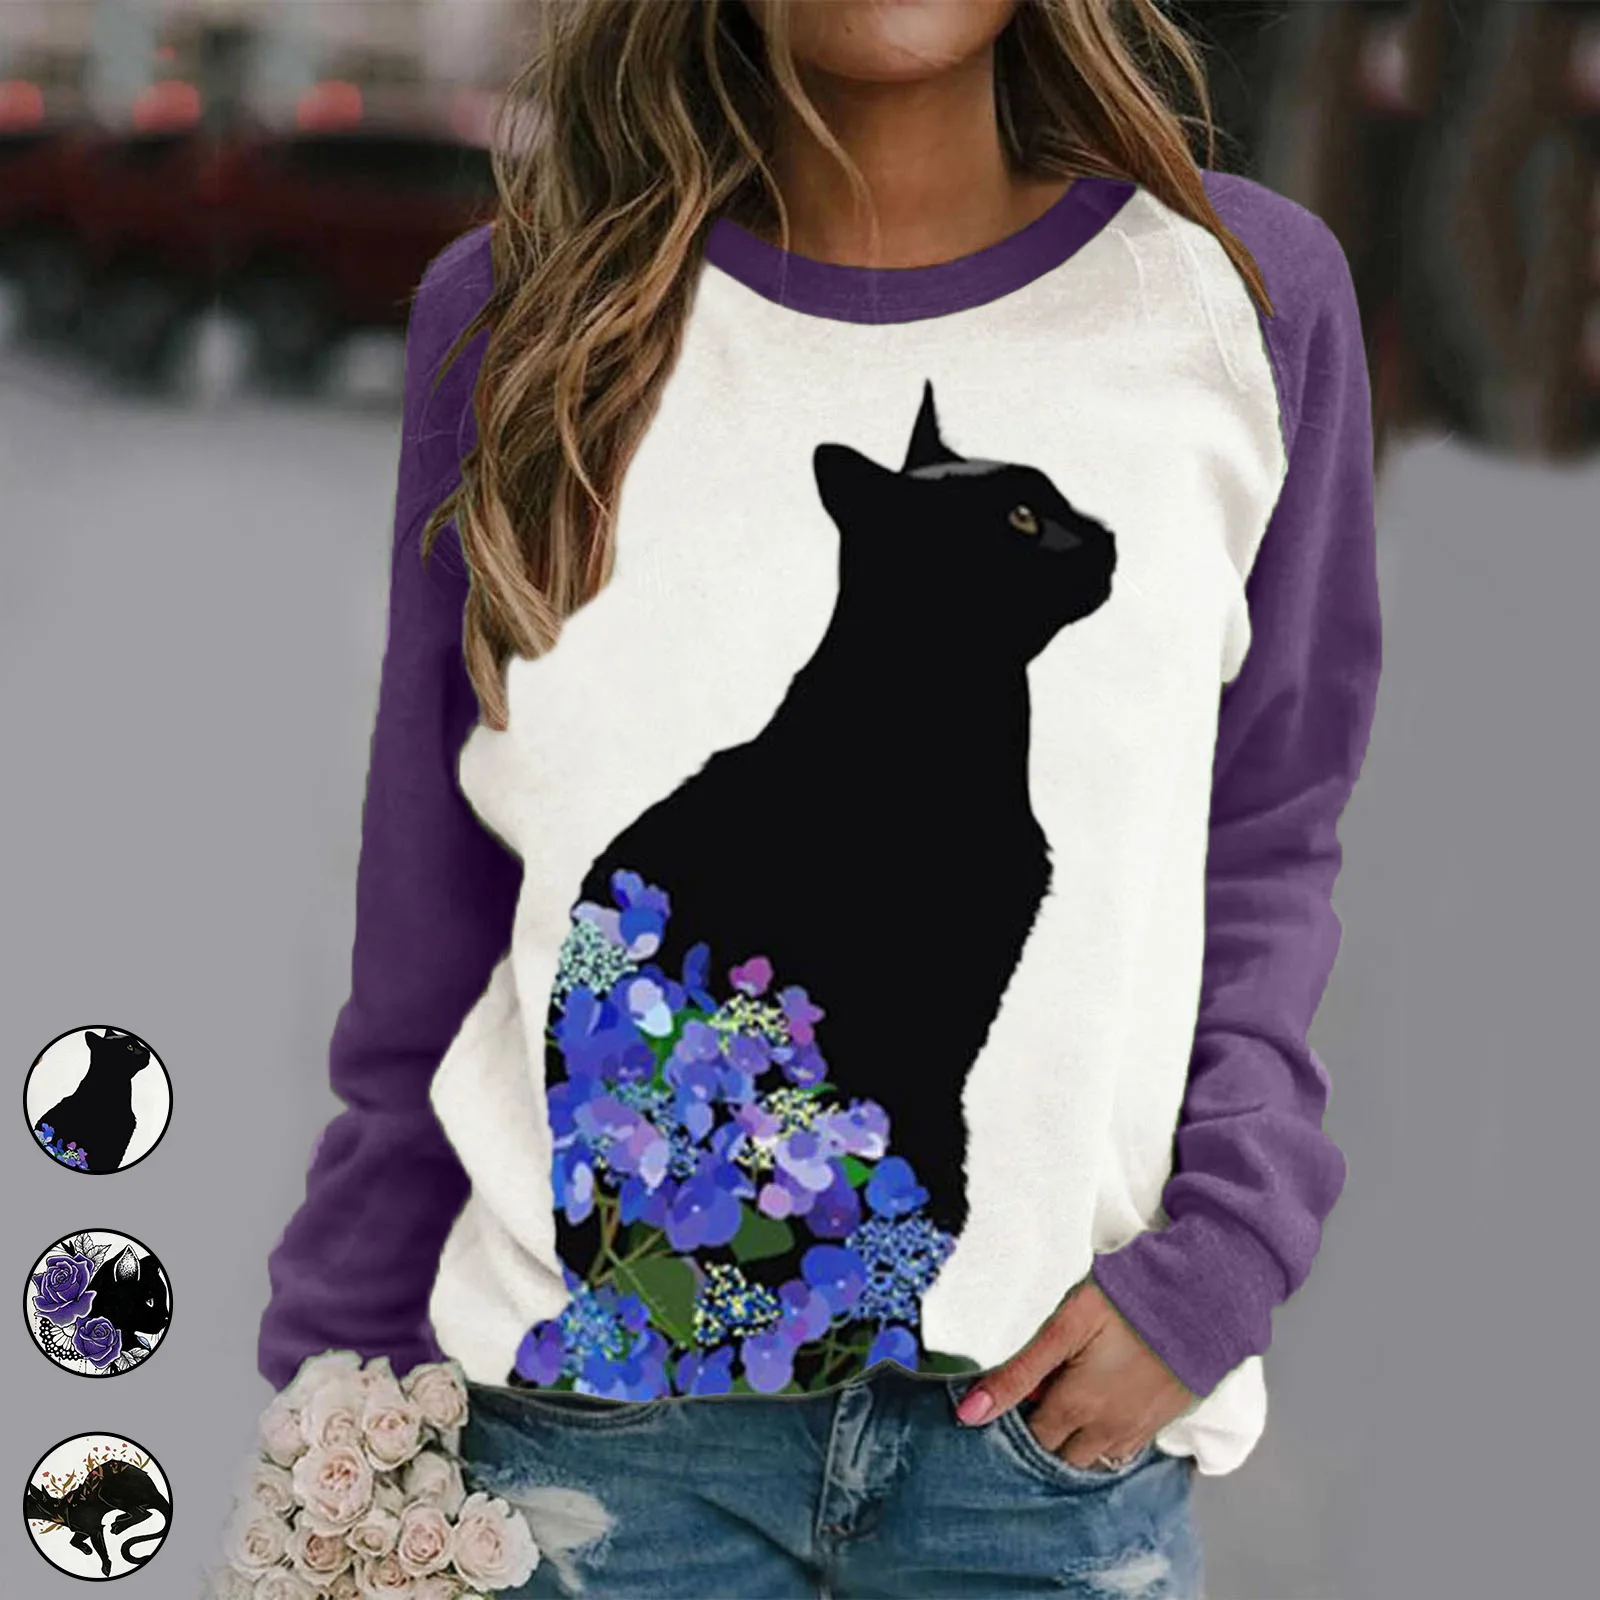 2022 Autumn New Women's Cat Fashion Casual Round Neck Long-sleeved Top T-shirt Y2k  Women Clothes футболка оверсайз